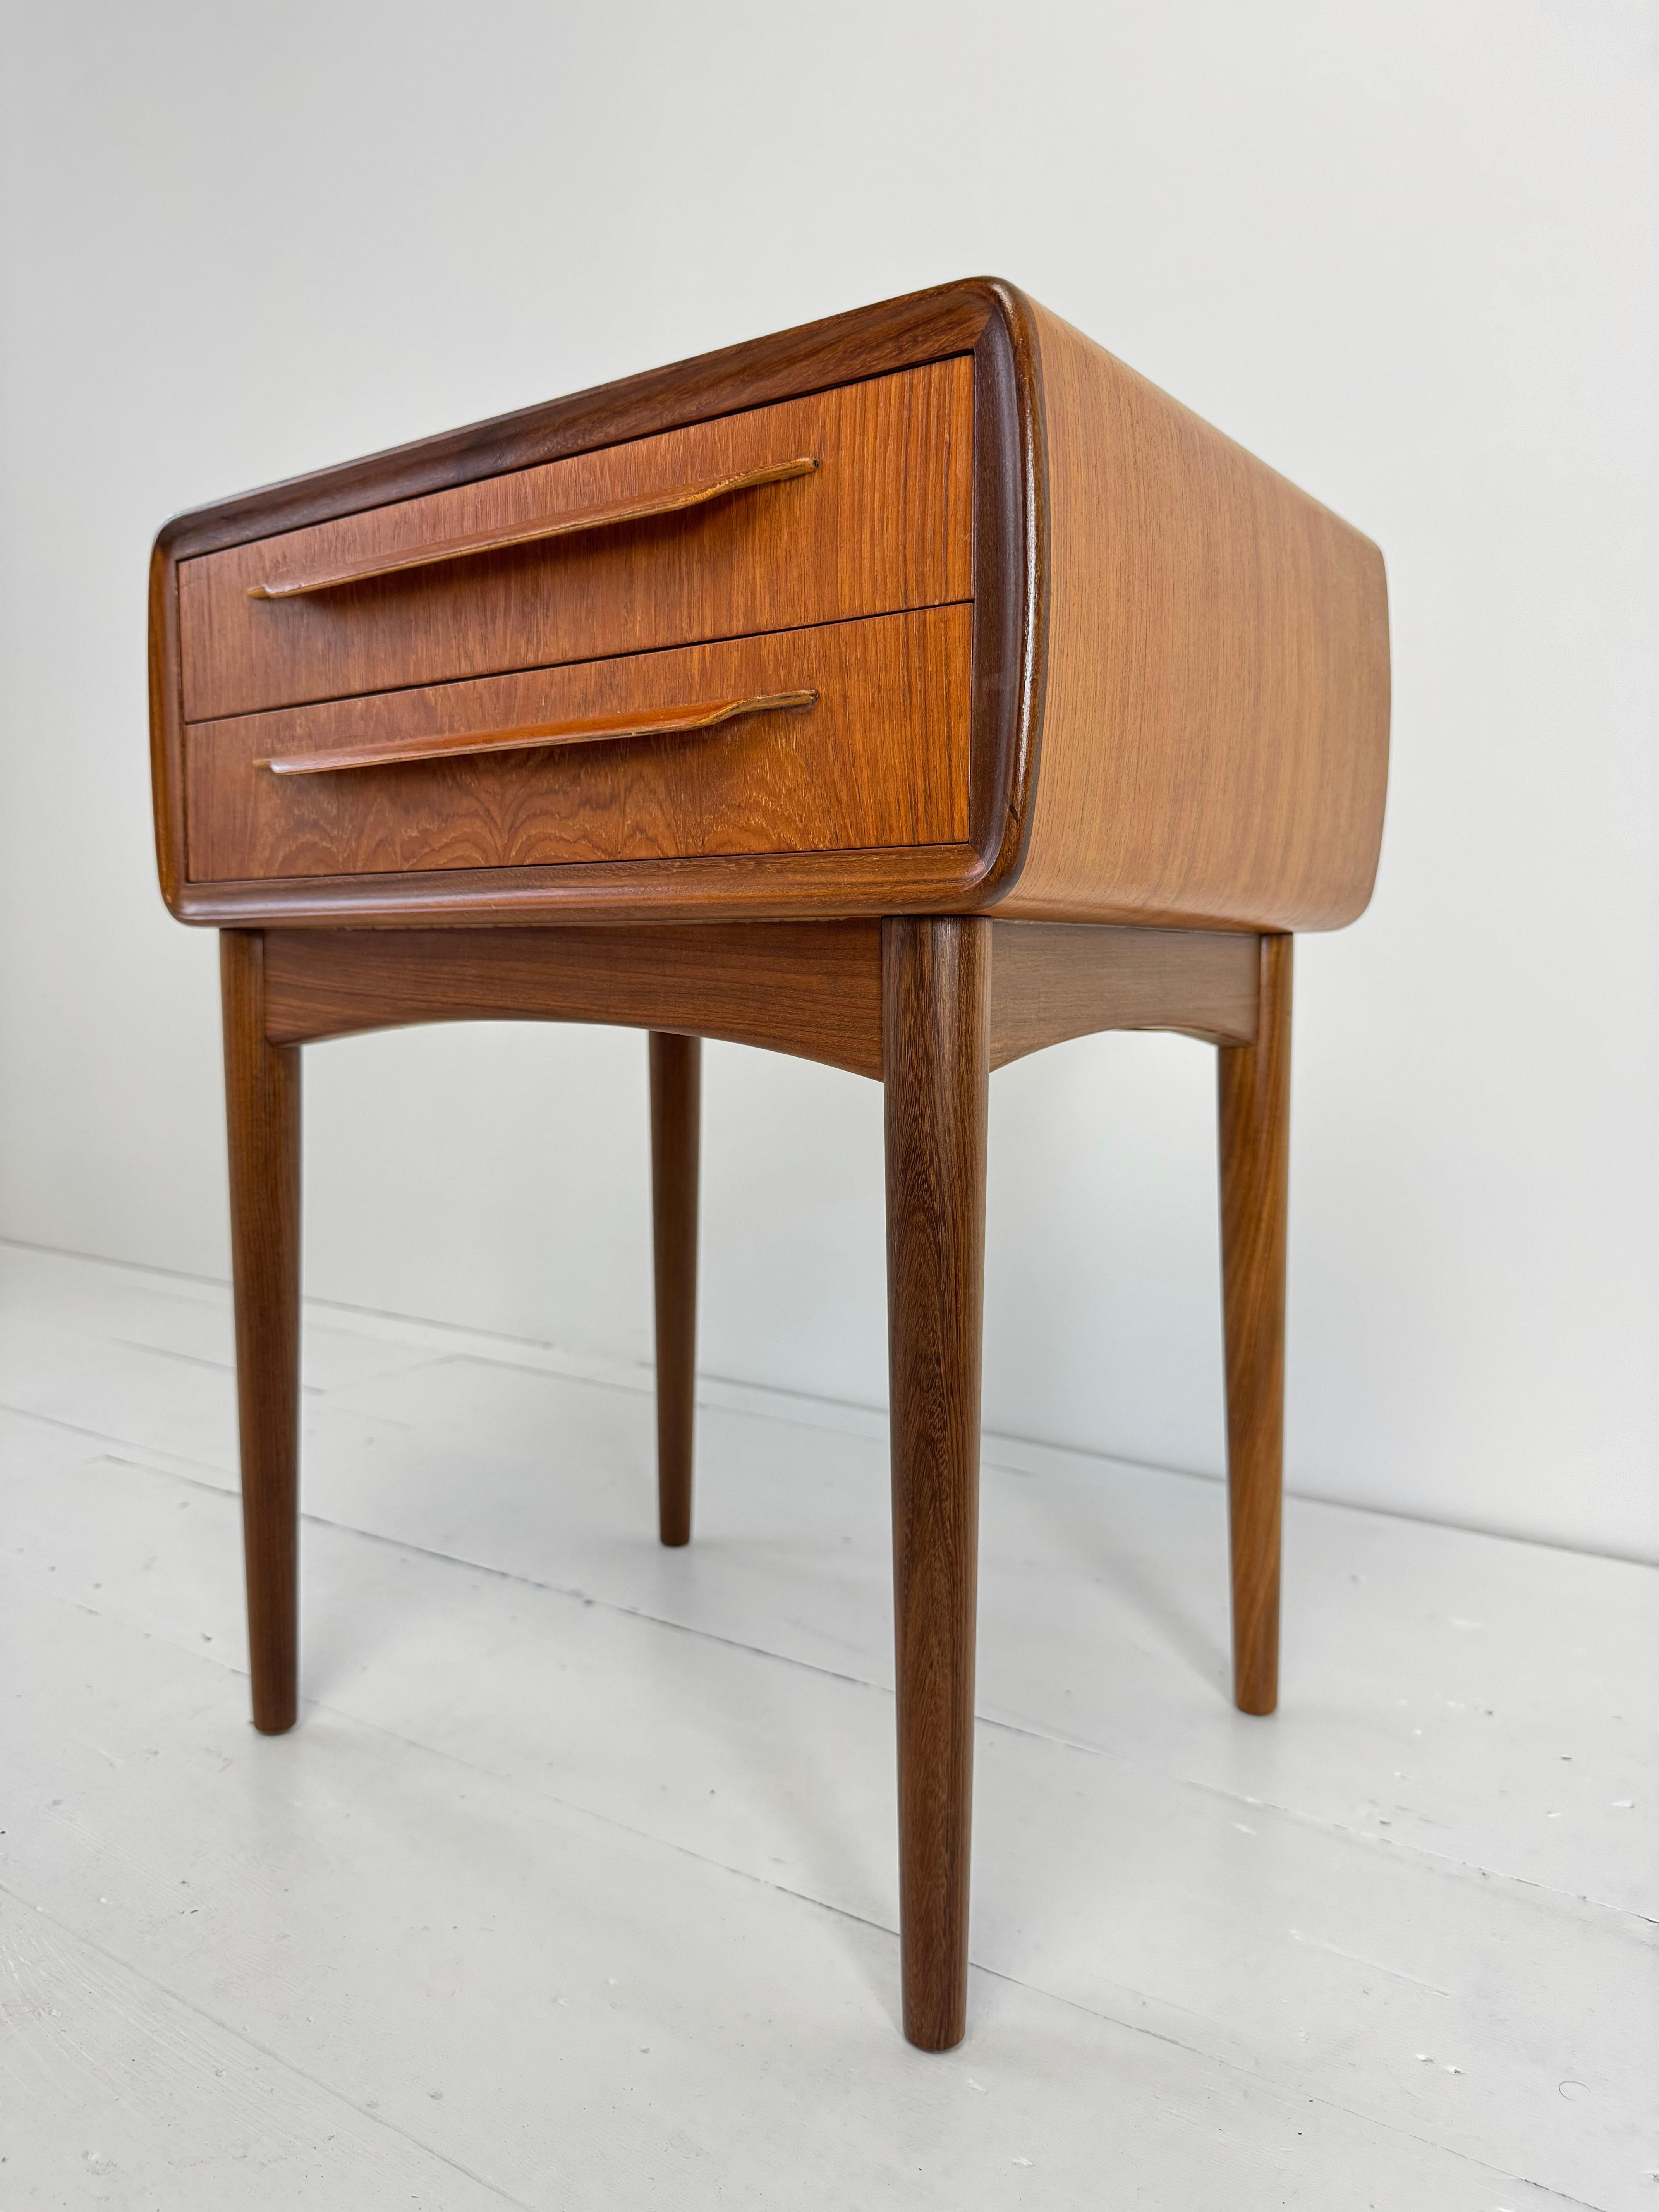 A Pair of Teak Night Stands by Johaness Andersen c.1960's For Sale 1